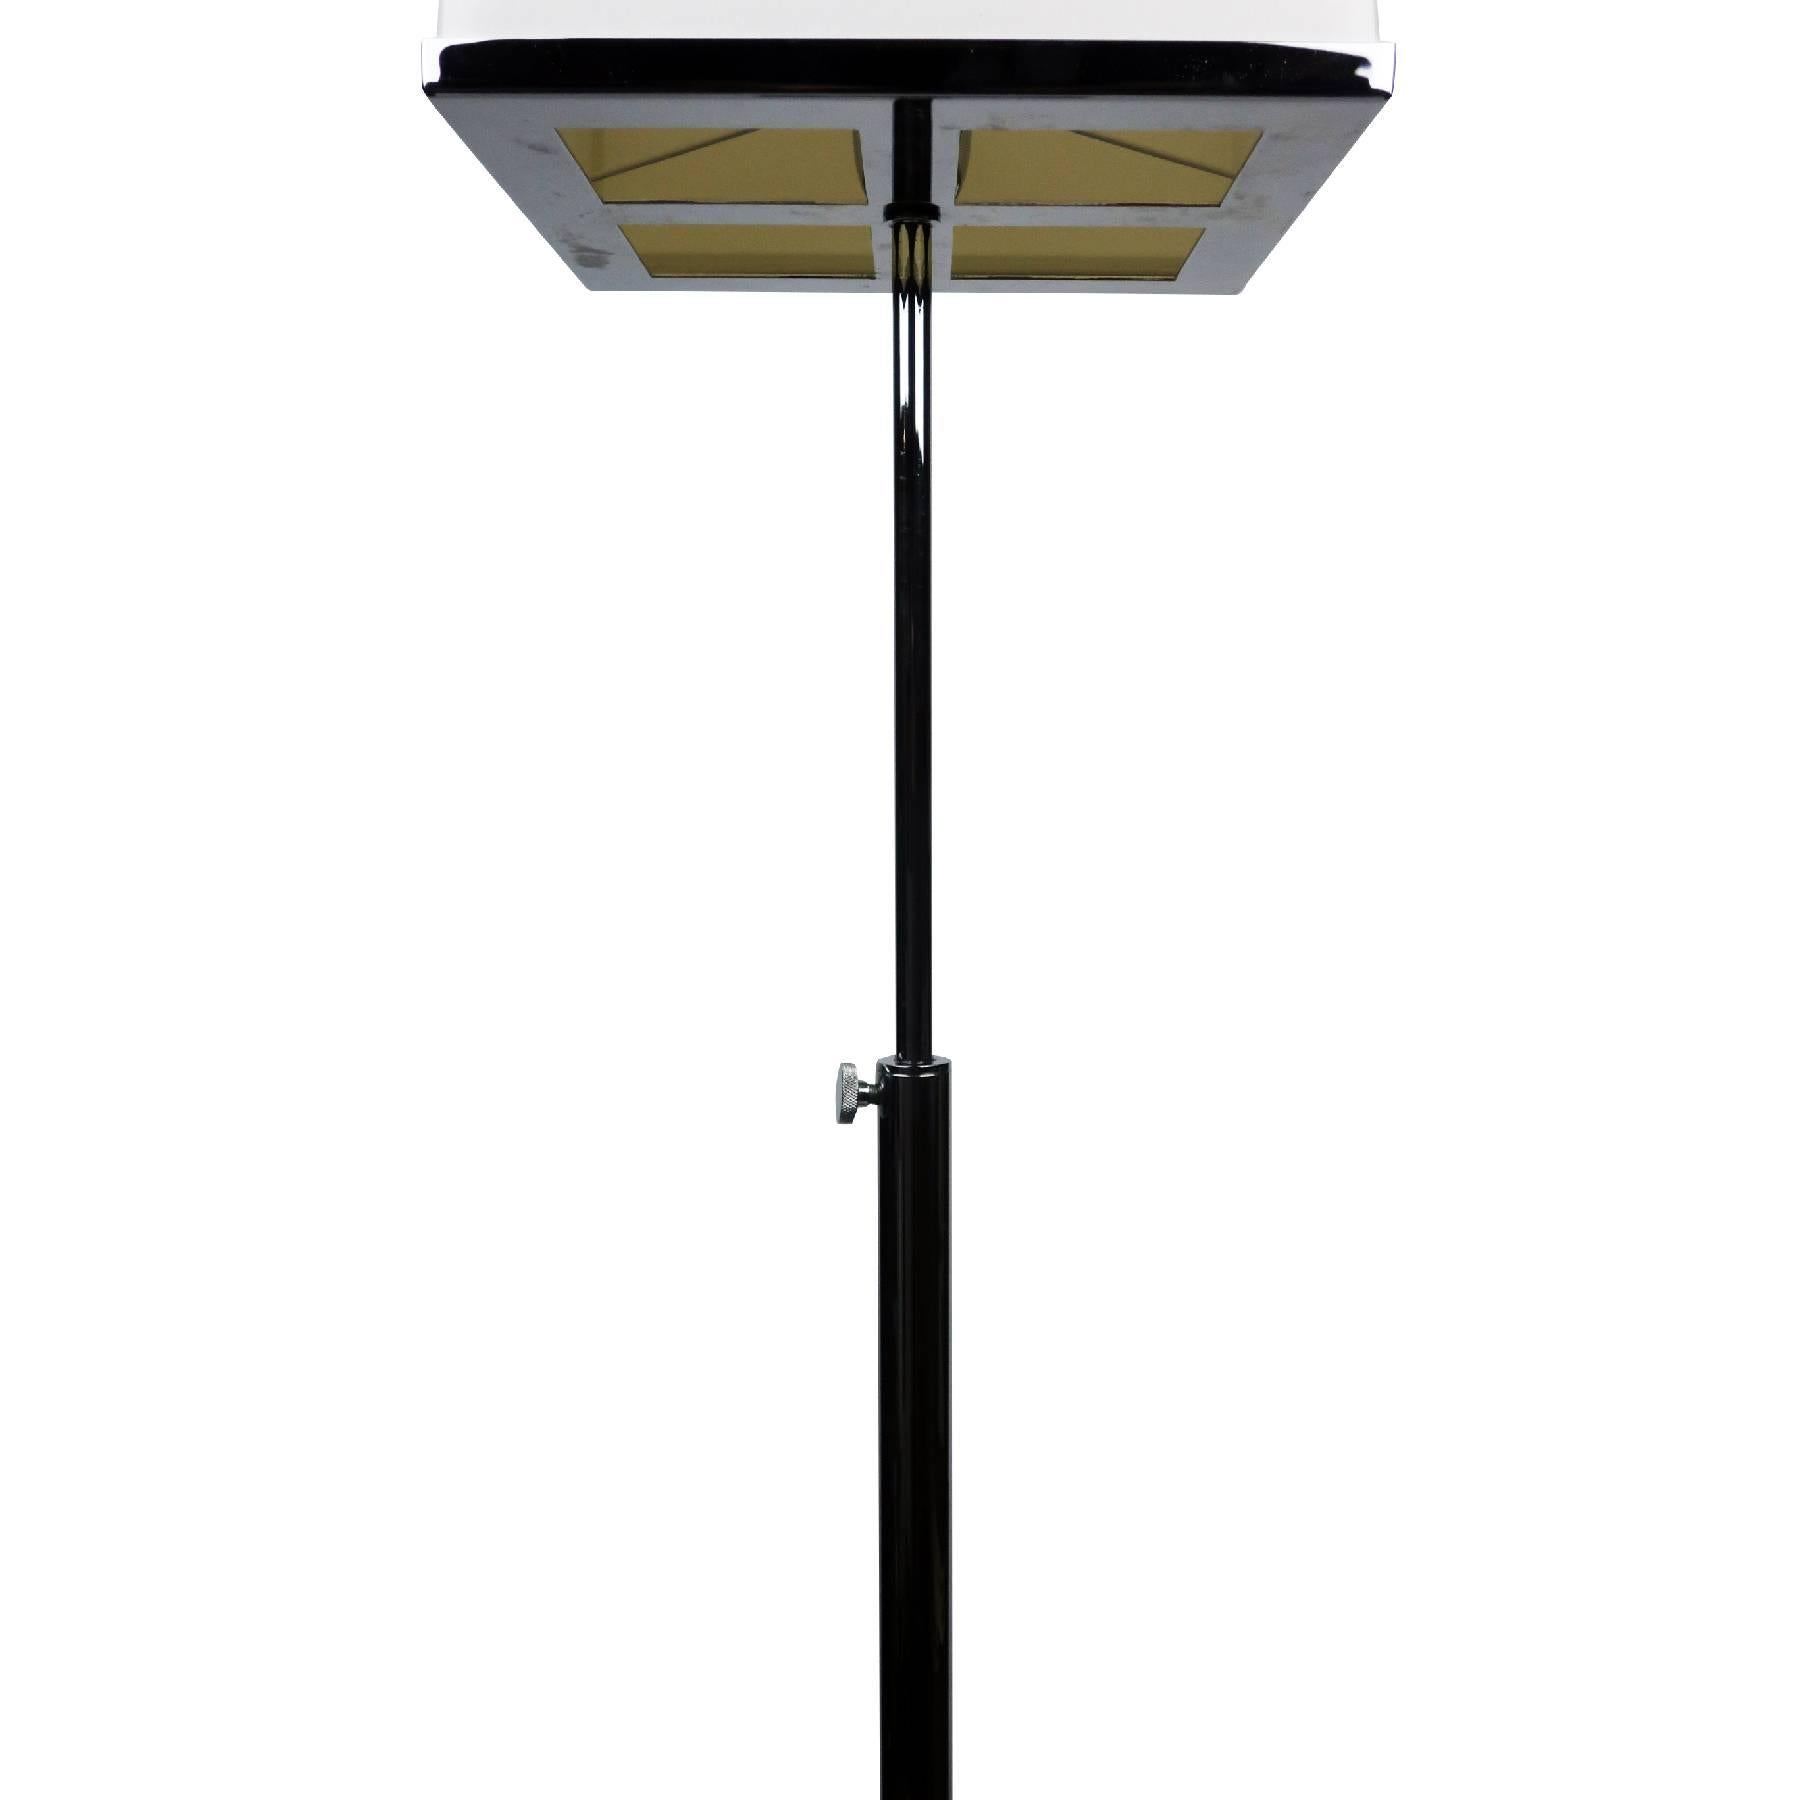 Manufactured by Fontana Arte, this contemporary floor lamp has a chromed metal base, stem, and shade holder, along with a chrome knob on the stem to adjust the lamp’s height. A new custom-built square lampshade sits securely on top and tapers in